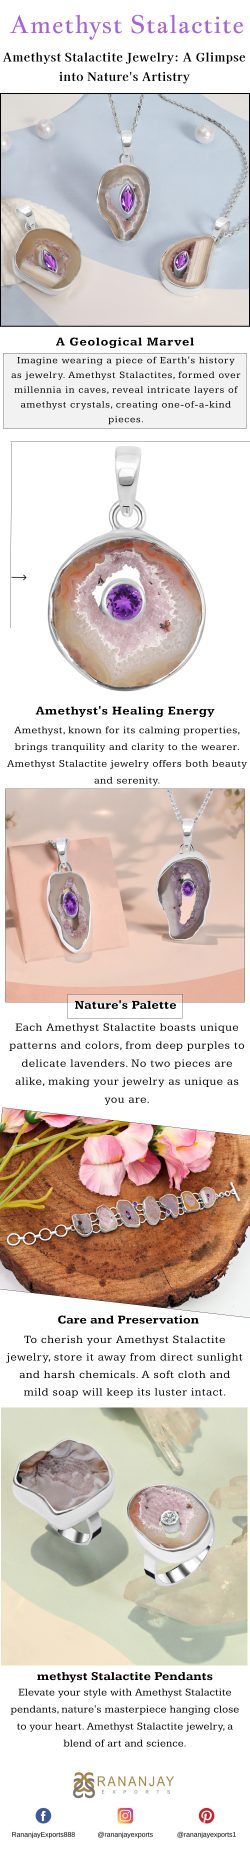 Amethyst Stalactite Jewelry: A Glimpse into Nature’s Artistry